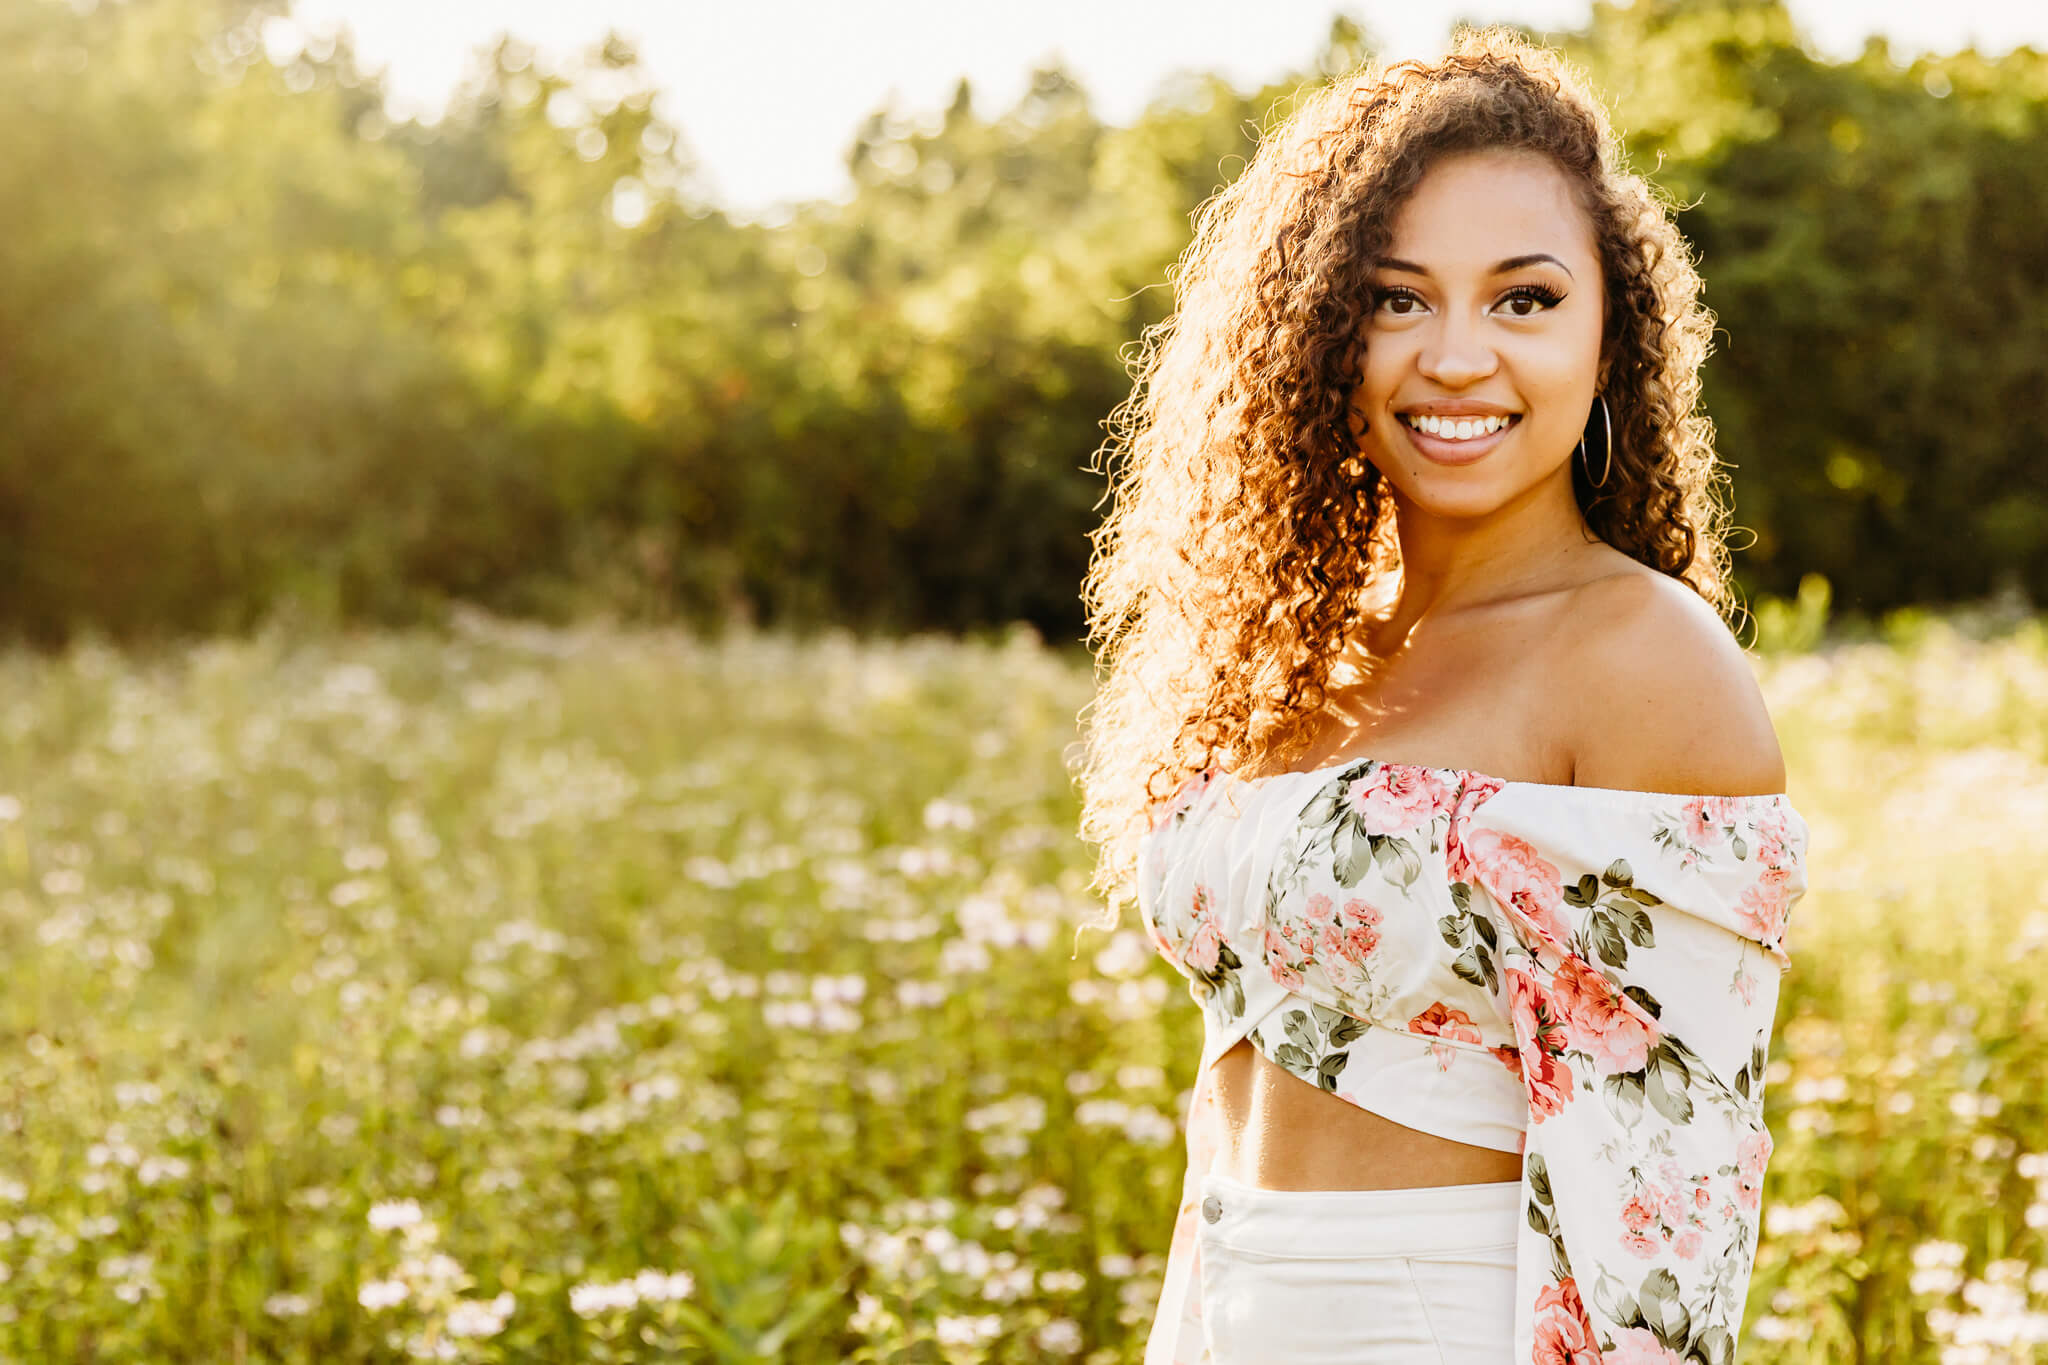 gorgeous high school senior in a floral top and white pants smiling while standing in flowers near Green Bay